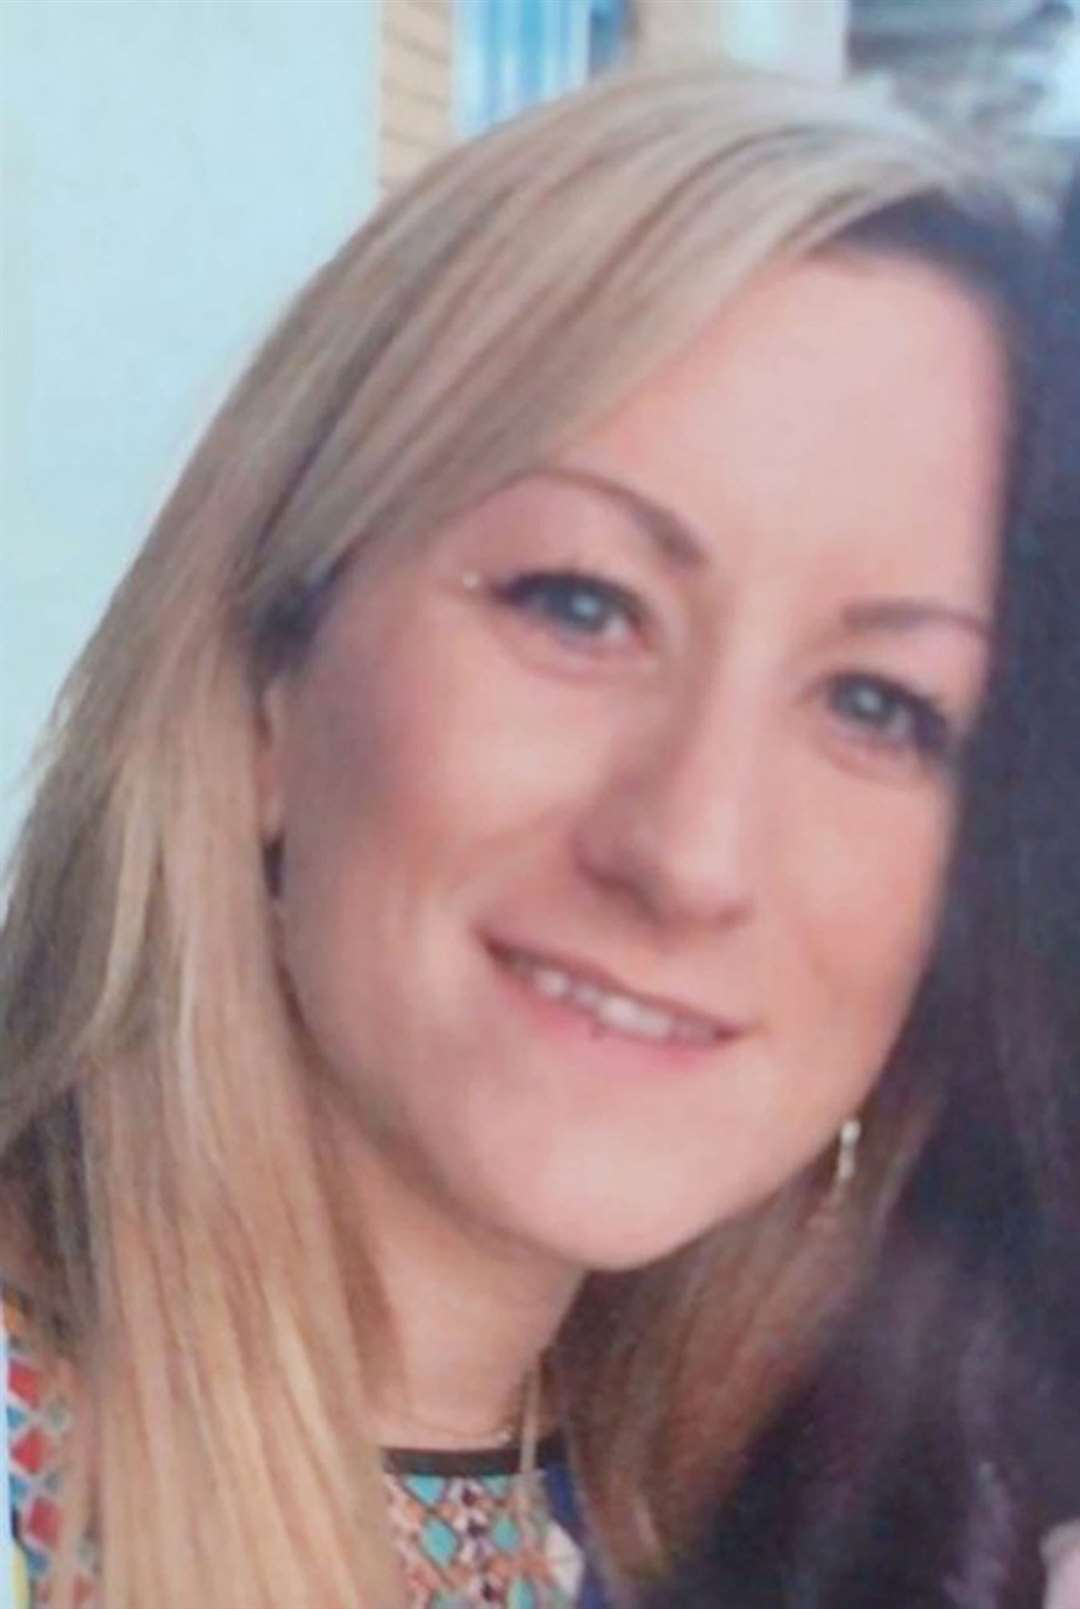 Human remains found in a park in south London have been identified as 38-year-old Sarah Mayhew from Croydon (Metropolitan Police/PA)